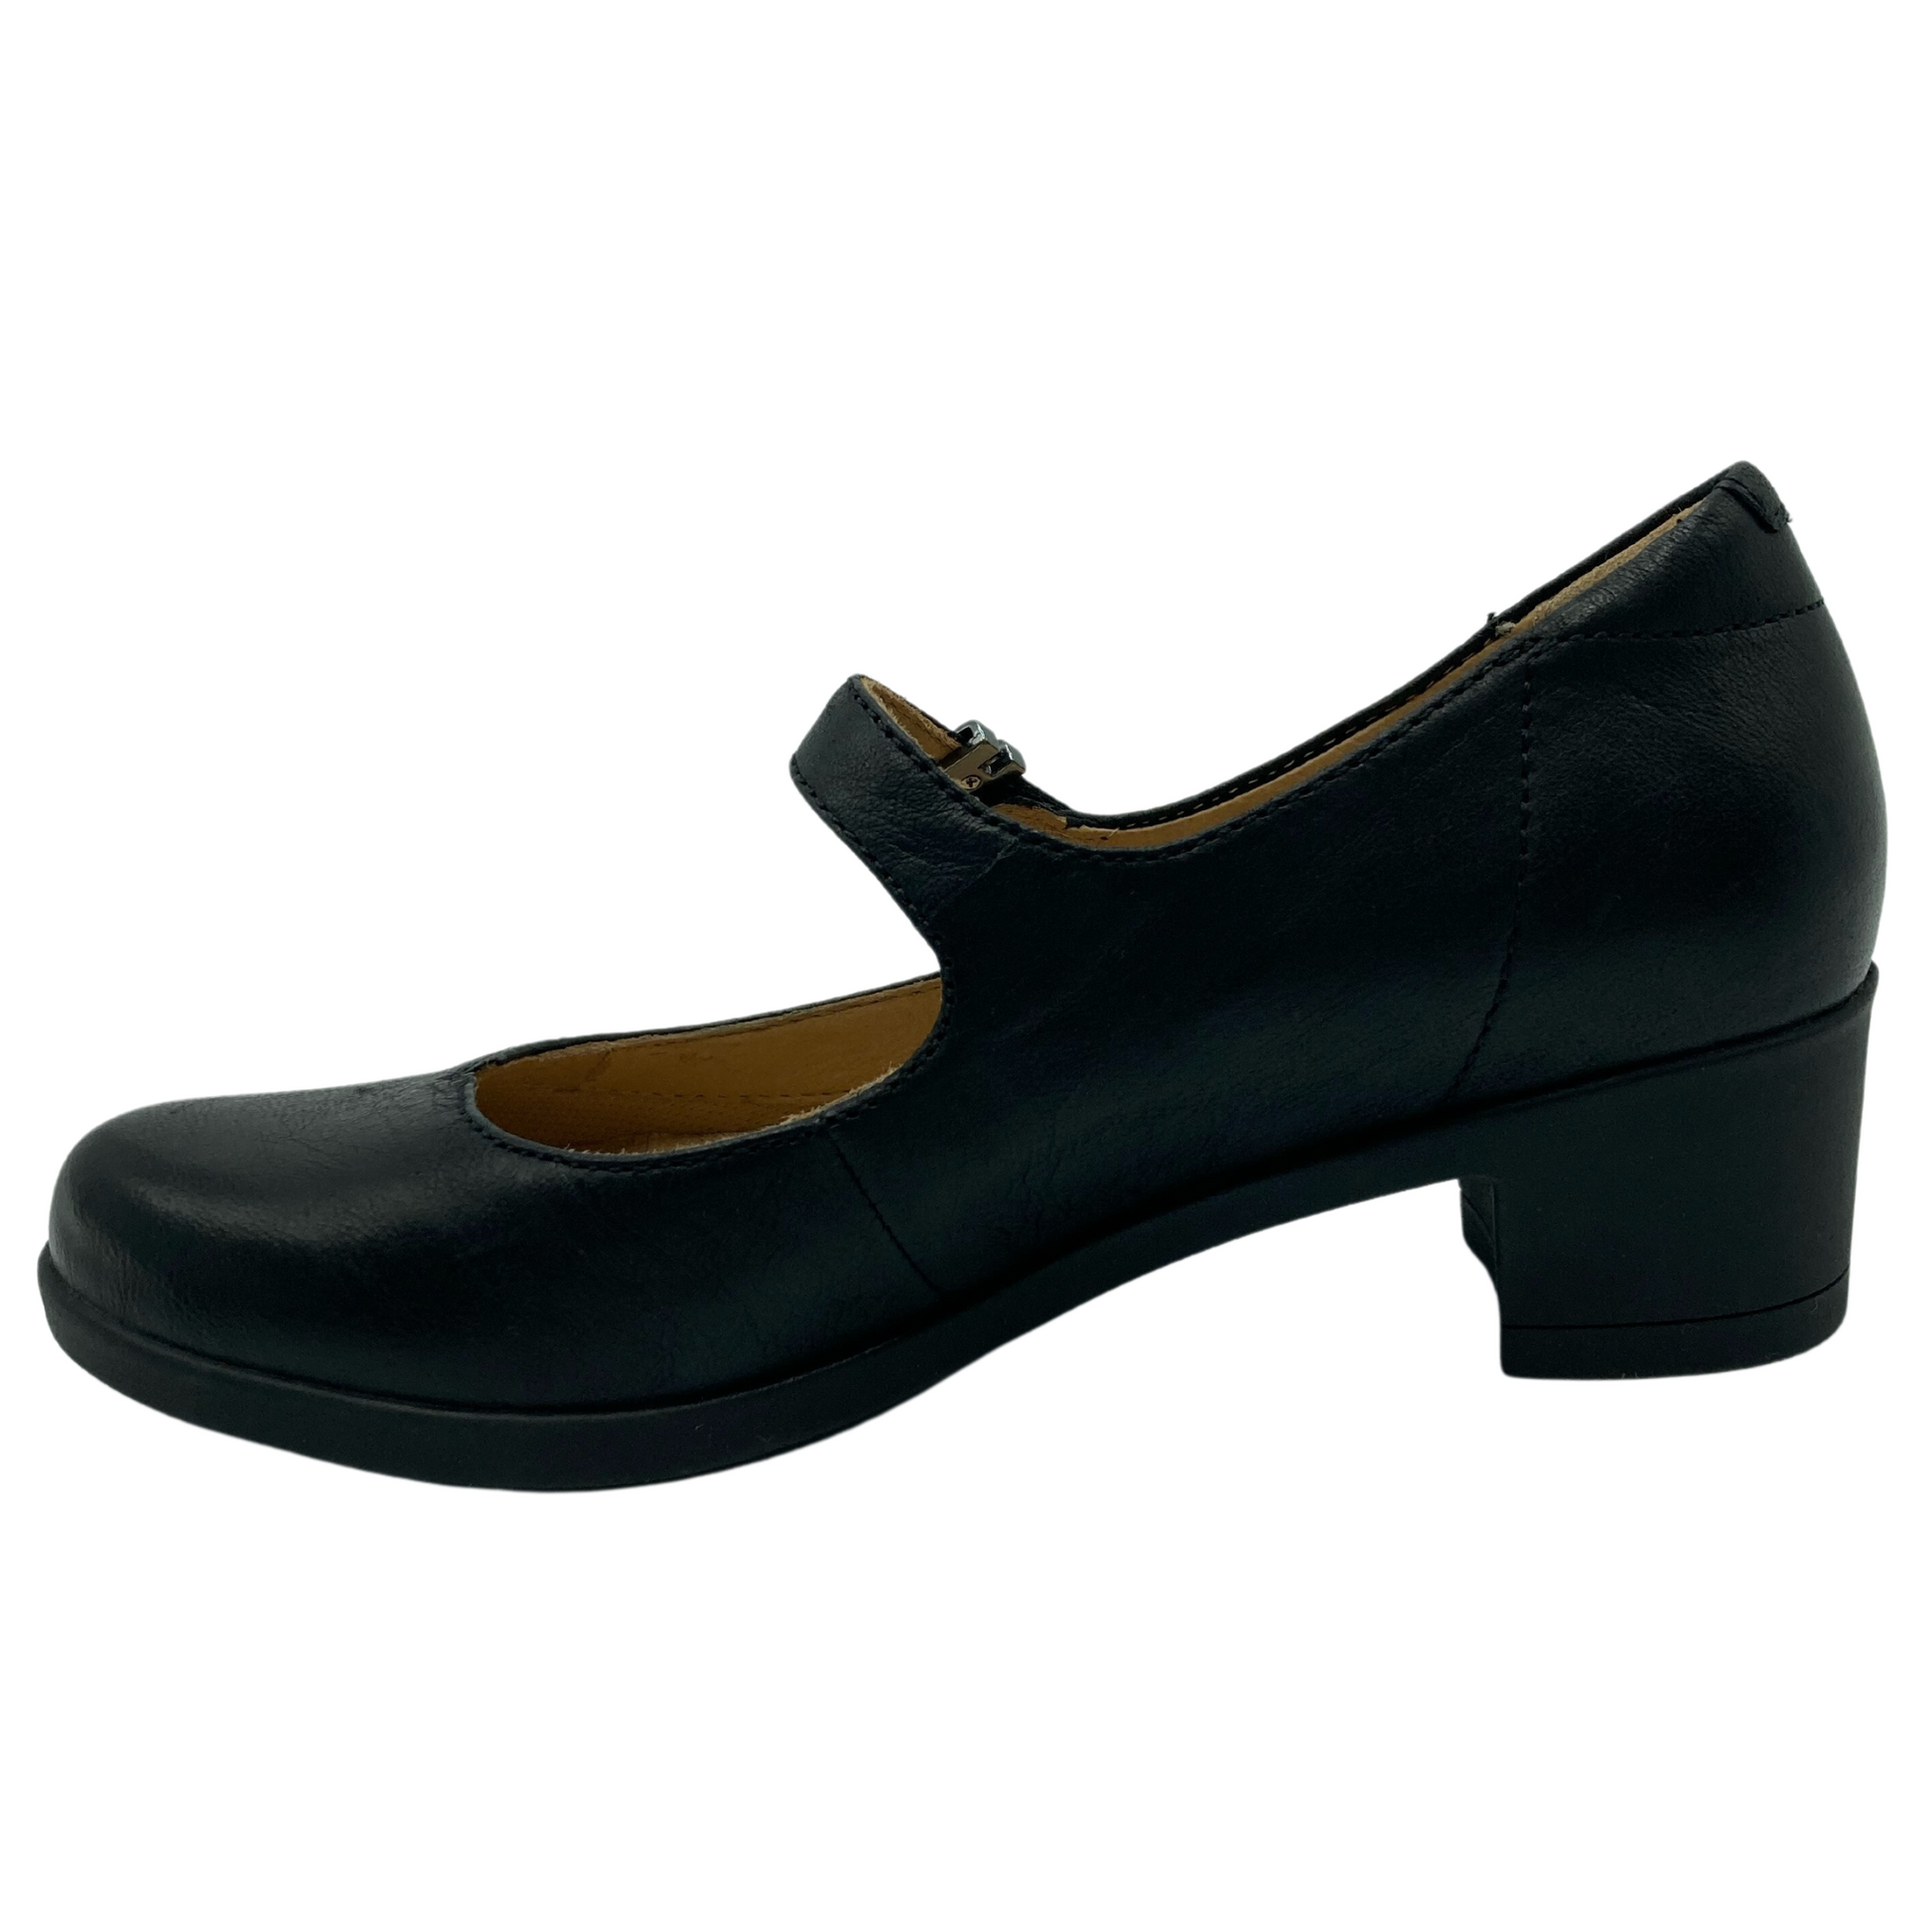 Left view of black leather mary jane with low block heel and rounded toe